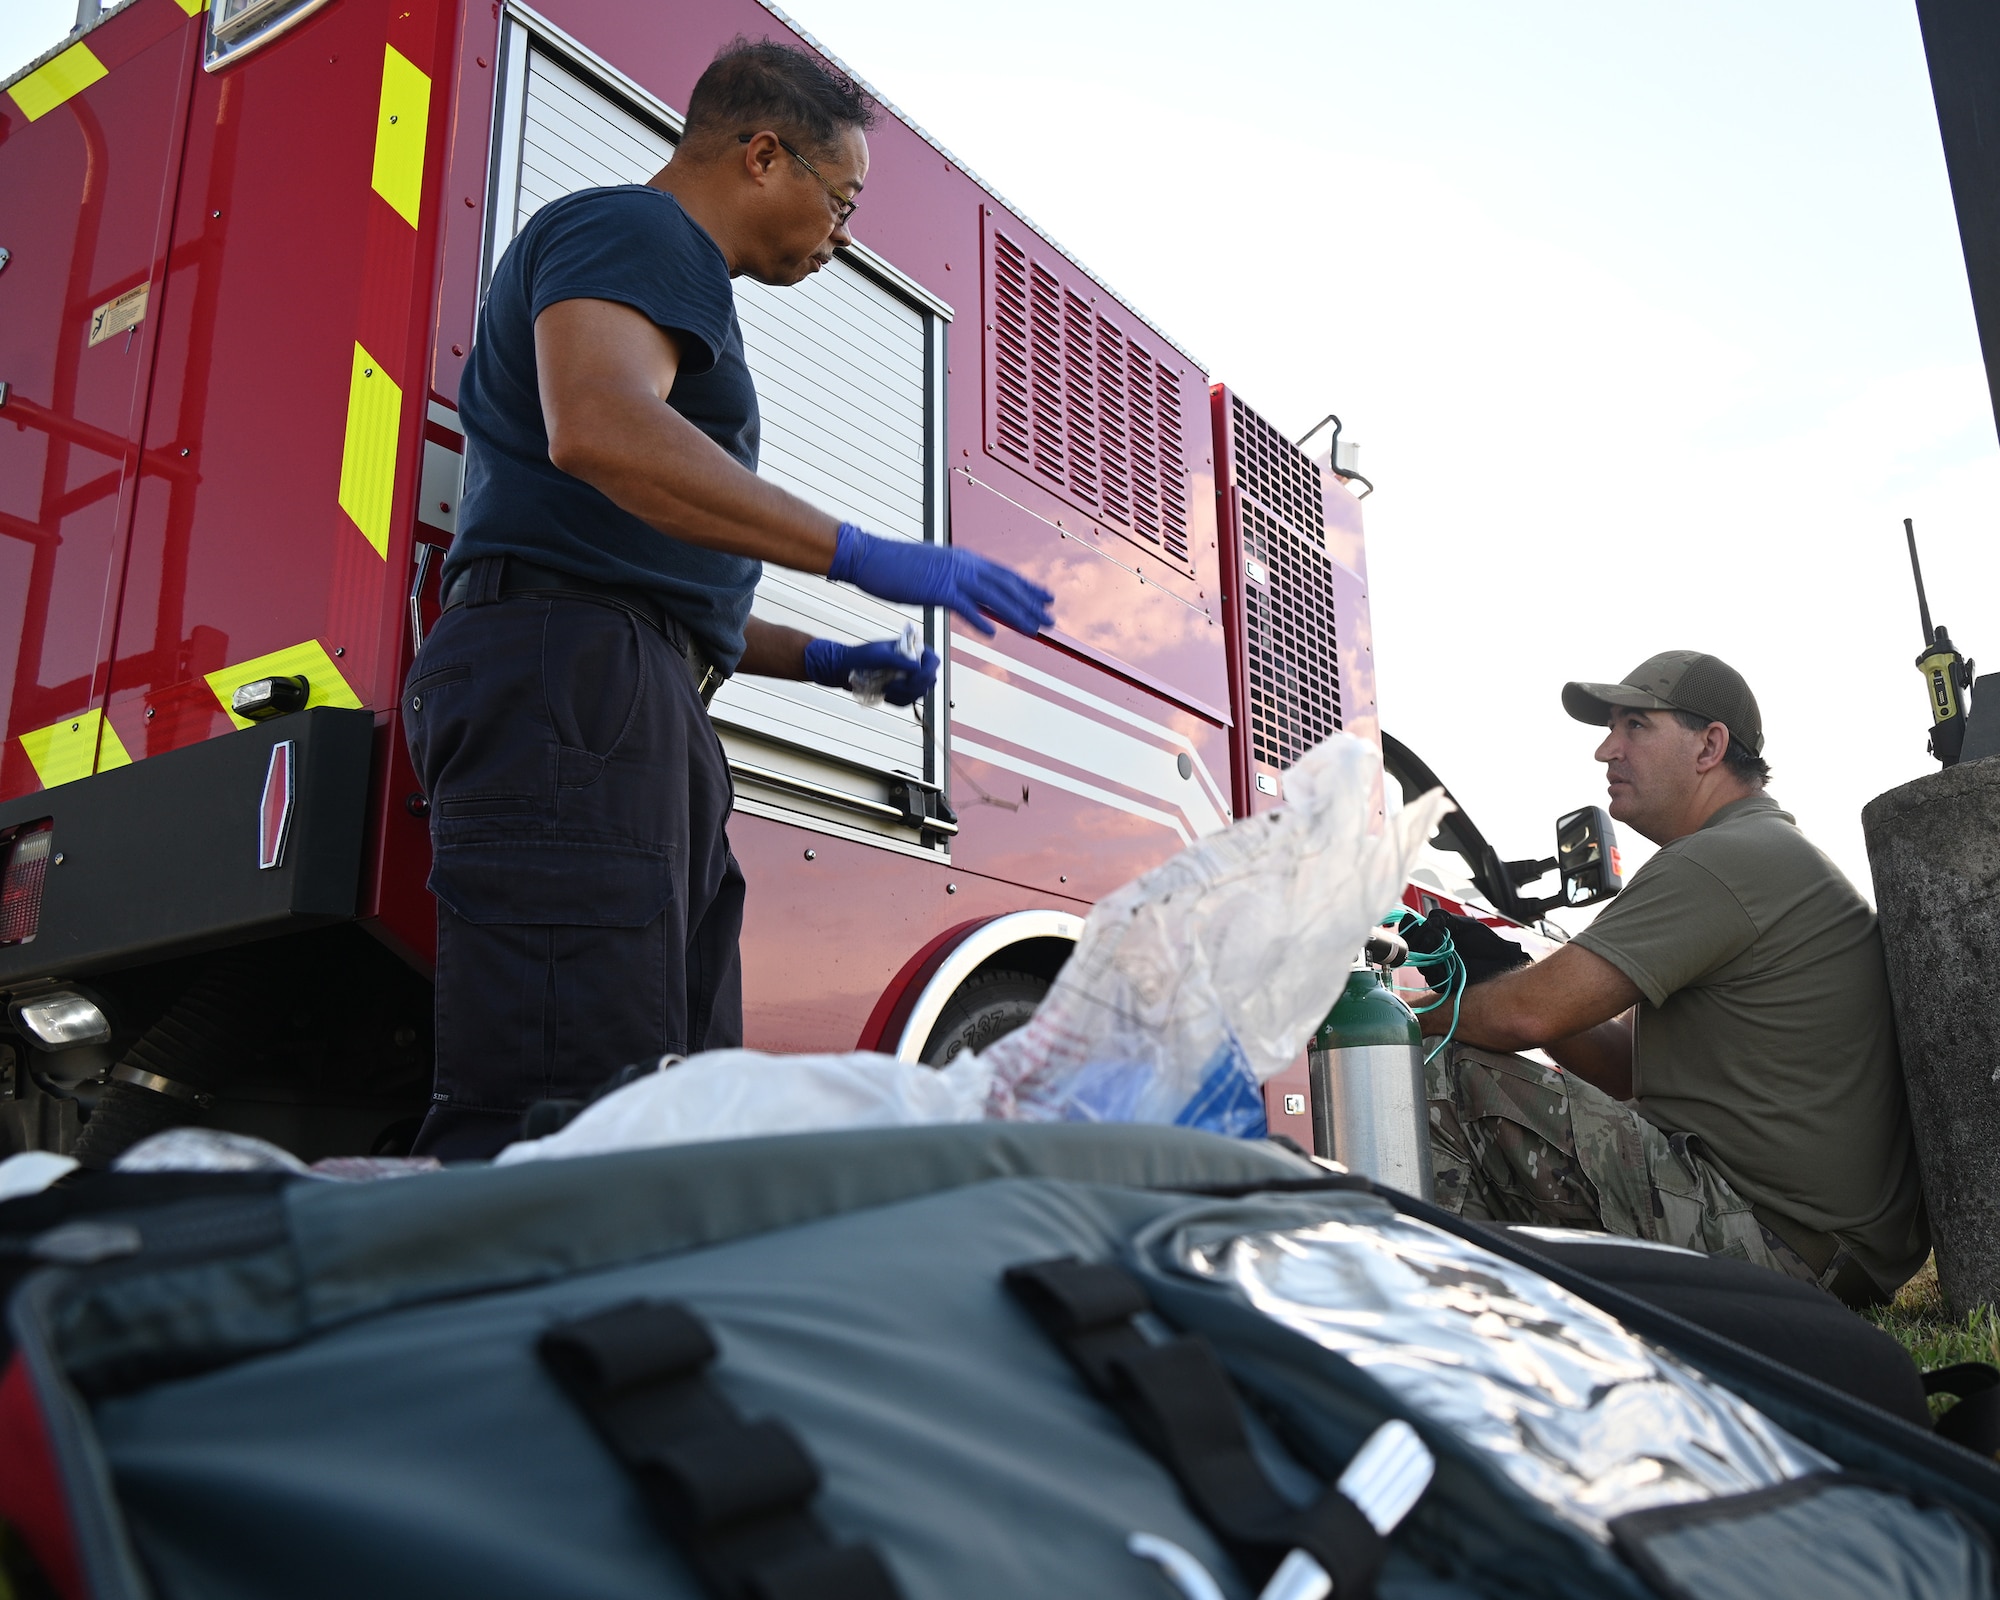 U.S. Air Force Staff Sgt. Jason Zabetakis, a fuels craftsman assigned to the 175th Mission Support Group, receives medical care from Sterling Johnson, a firefighter 2 assigned to the 175th Wing Fire Department, after a simulated fuel spill during a Mission Assurance Exercise at Warfield Air National Guard Base at Martin State Airport, Middle River, Maryland, August 12, 2022.